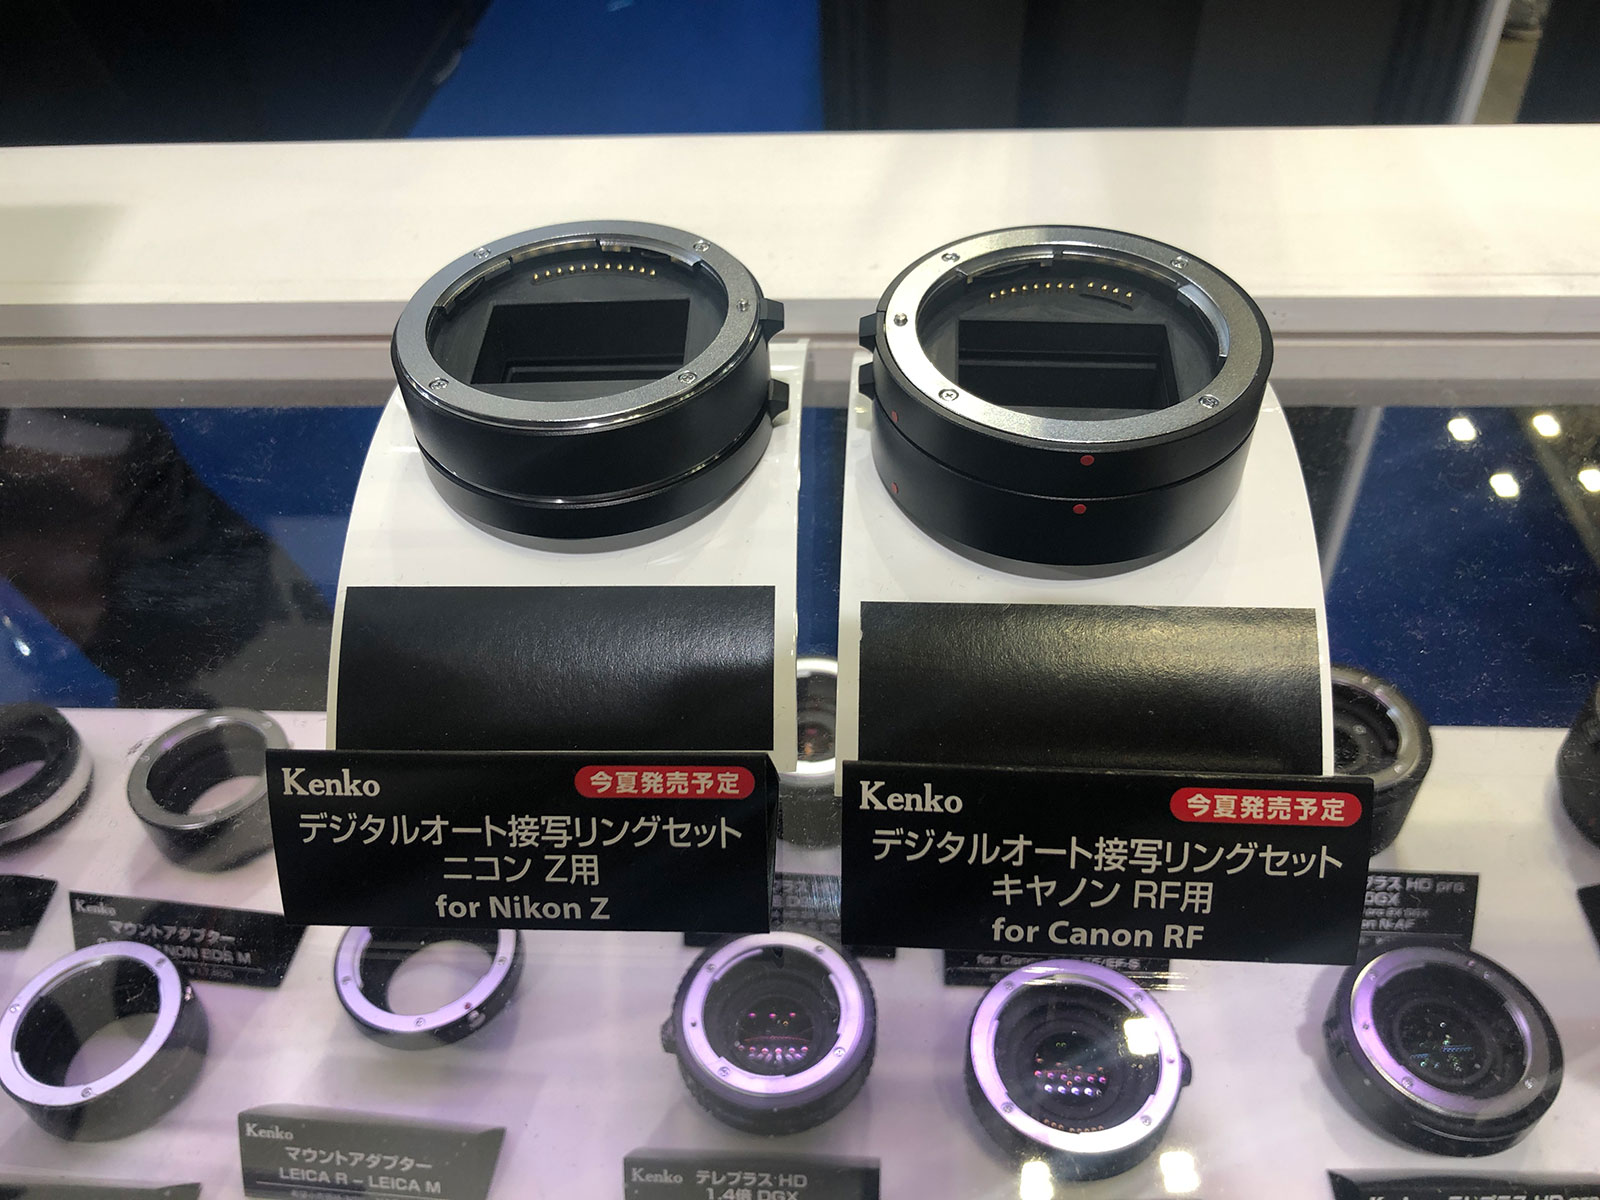 A new and coming soon product showcased in this corner is Kenko Digital Auto Extension Tube Set for the latest Nikon Z mount and Canon RF mount.